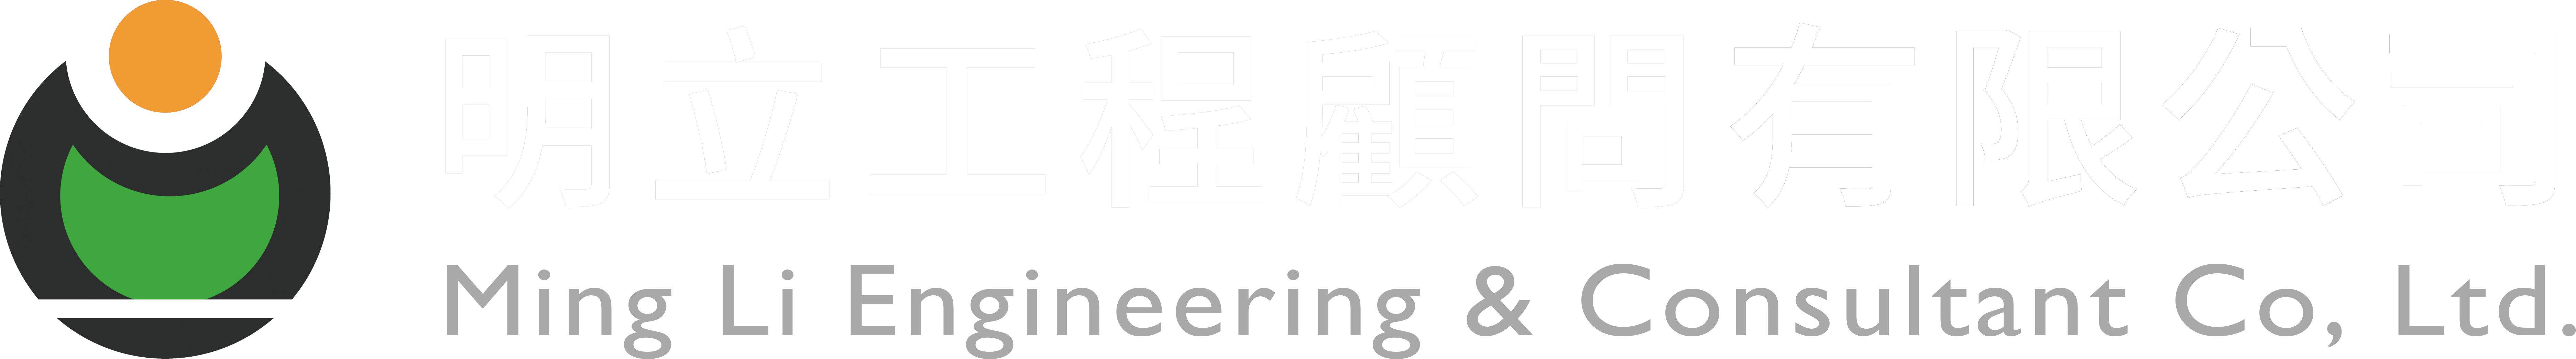 Ming Li Engineering & Consultant Co, Ltd.｜Professional Lighting and Sound Planning｜ETC Authorized Se